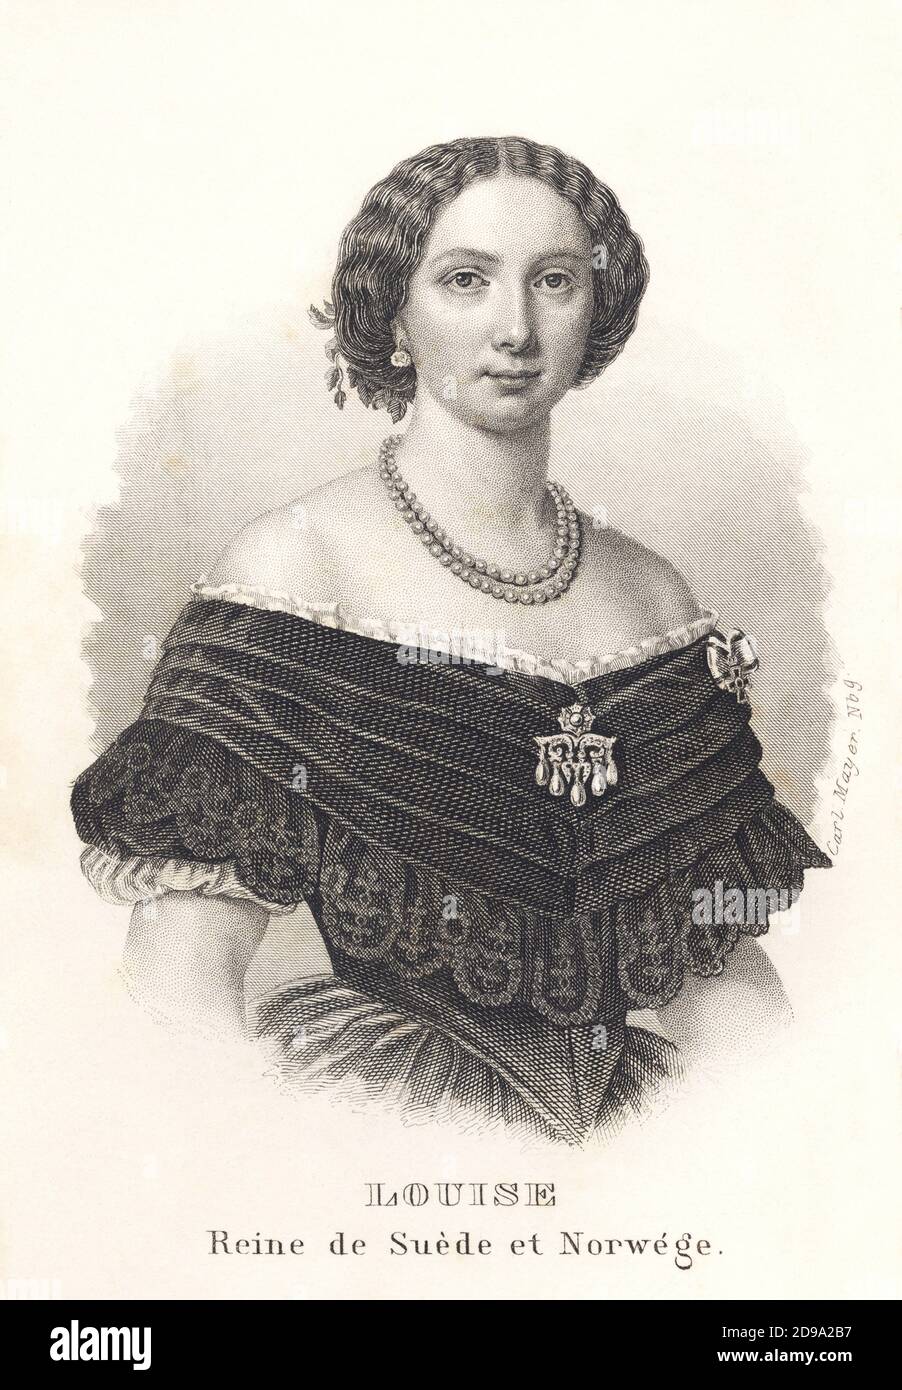 1861 : The  Queen of Sweden and Norway LOUISE ( Louise of the Netherlands , 1828 - 1871 ), spouse of King Charles XV of Sweden and IV of Norway. Engraved portrait from ALMANACH DE GOTHA , 1861. Her father was Prince Frederik of the Netherlands, the second child of King Willem I of the Netherlands and Wilhelmina of Prussia. Her mother was Princess Louise of the Netherlands (née Princess Louise of Prussia), the eighth child of King Friederich Wilhelm III of Prussia and Luise of Mecklenburg-Strelitz . Princess Louise married in 19 June 1850 Crown Prince Carl of Sweden and Norway, the son of King Stock Photo